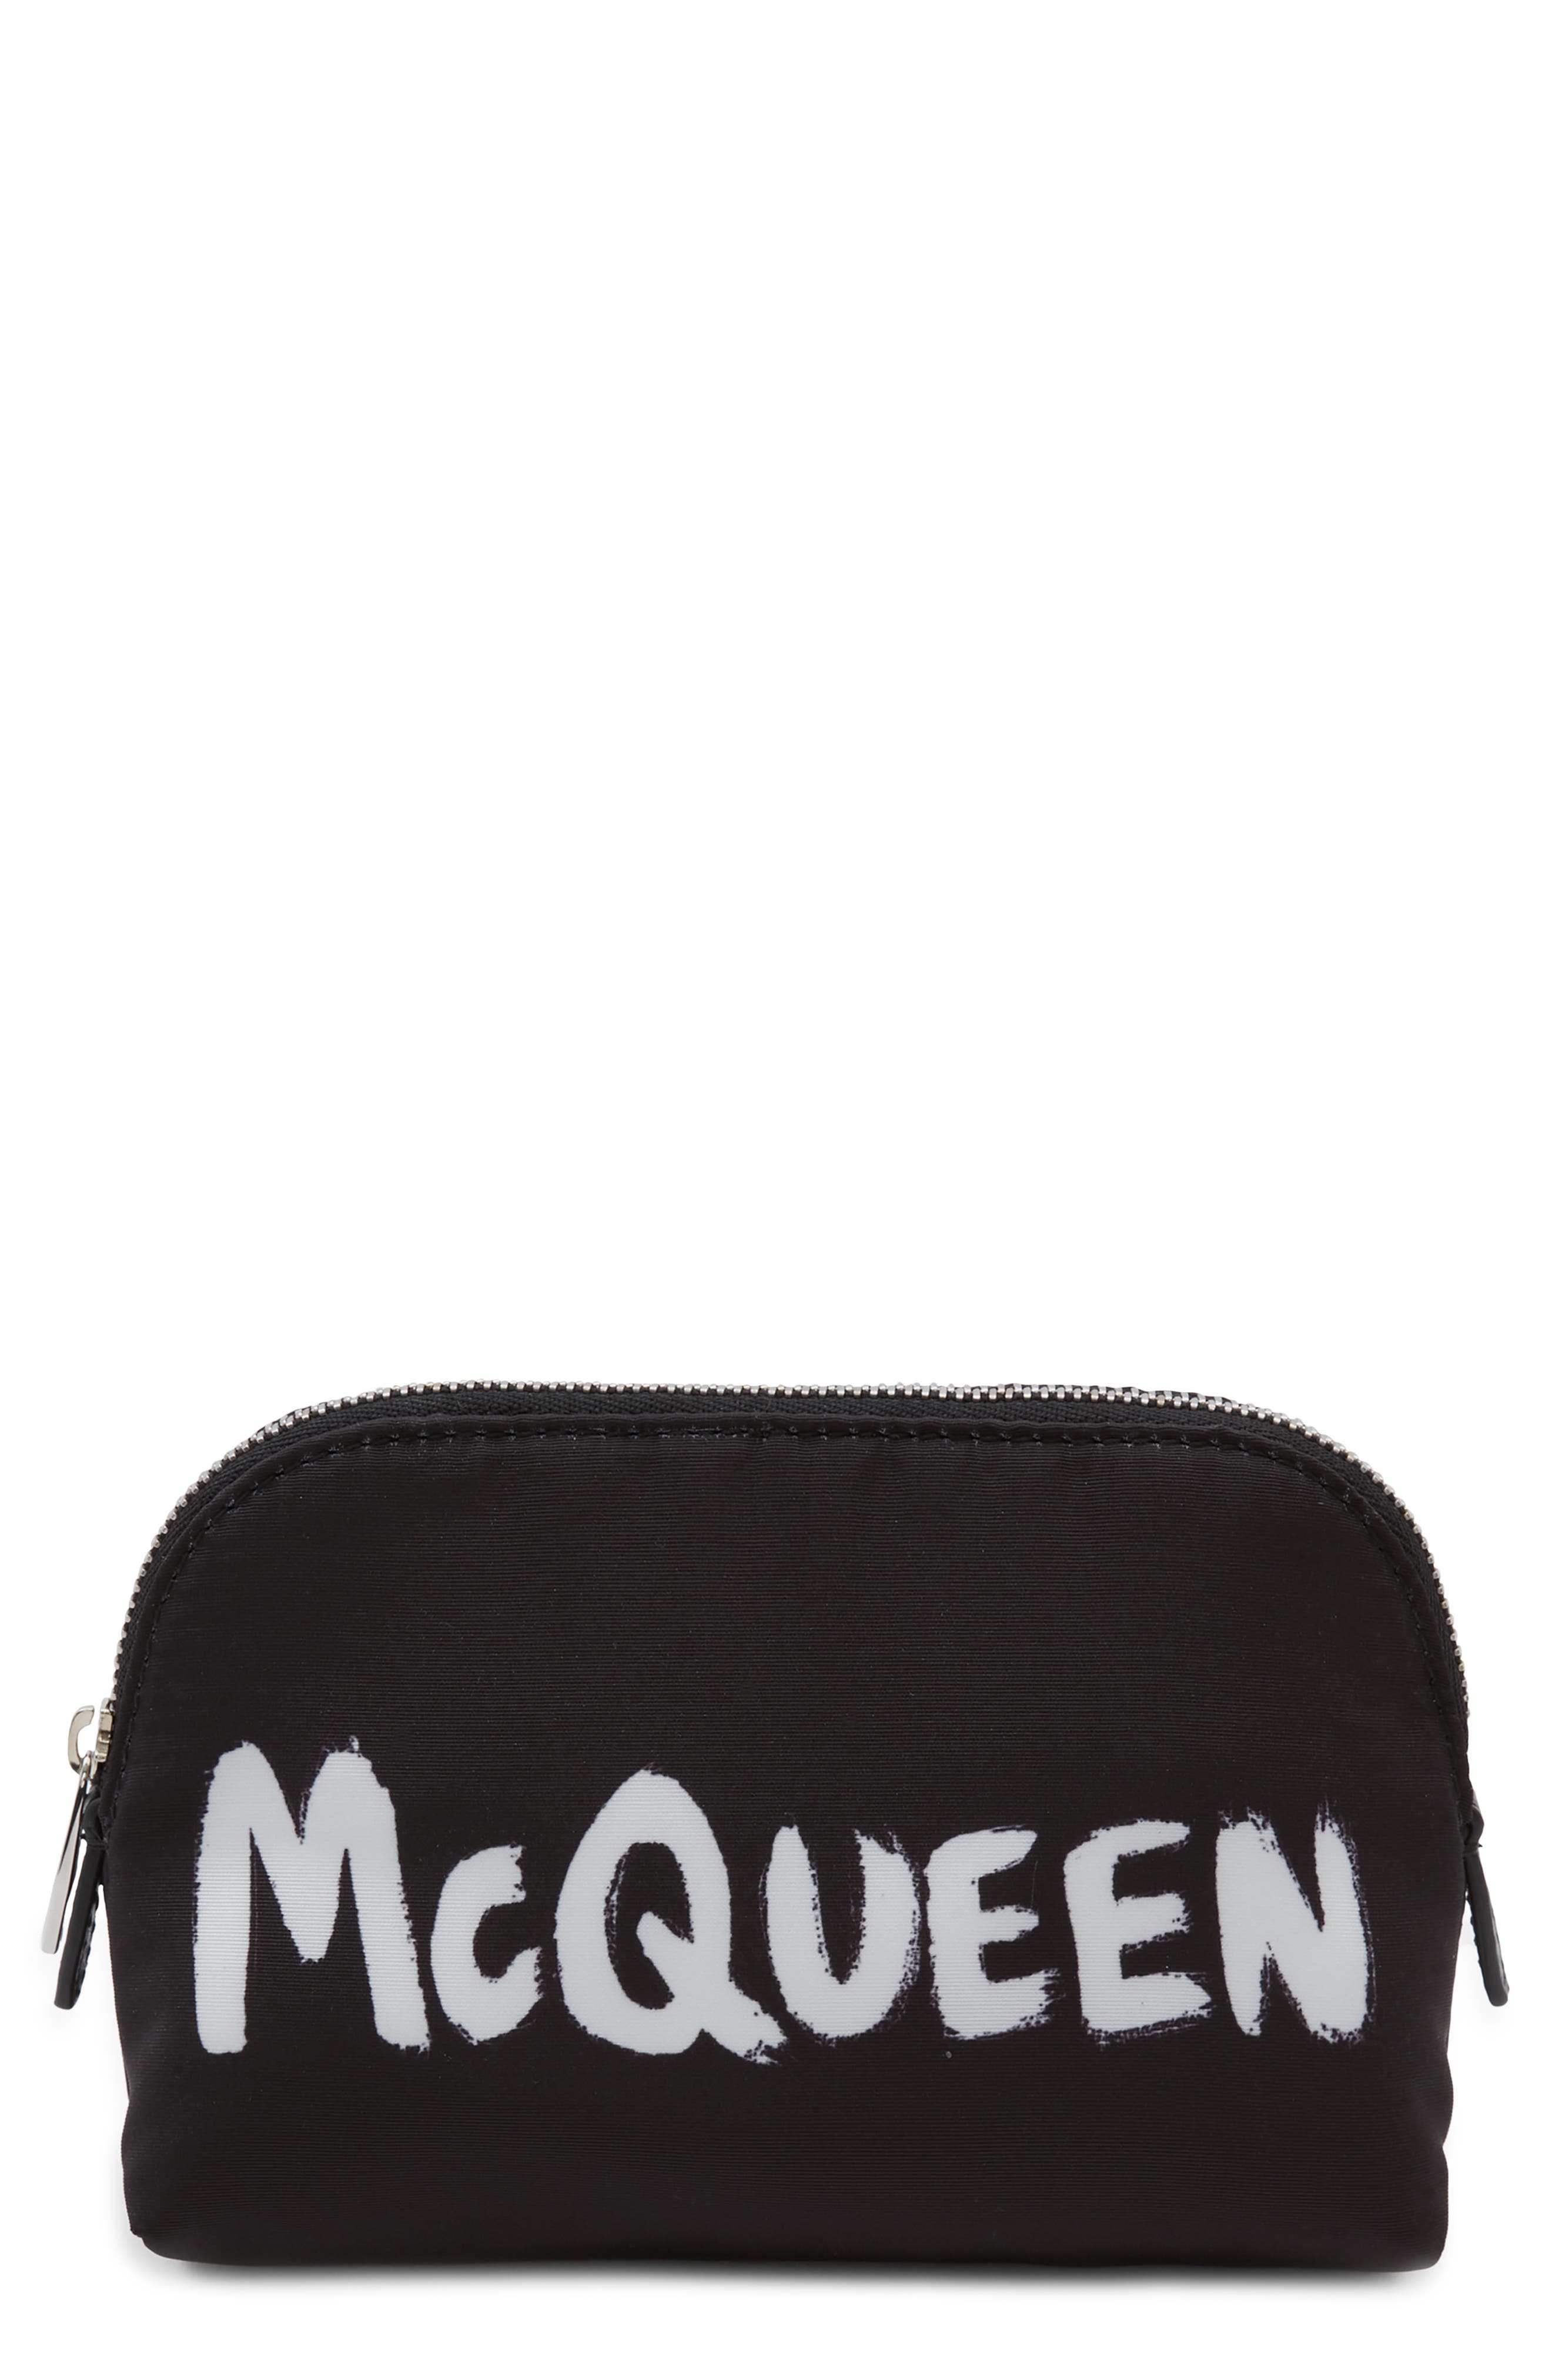 Alexander McQueen Medium Graffiti Recycled Faille Zip Pouch in Black/White at Nordstrom